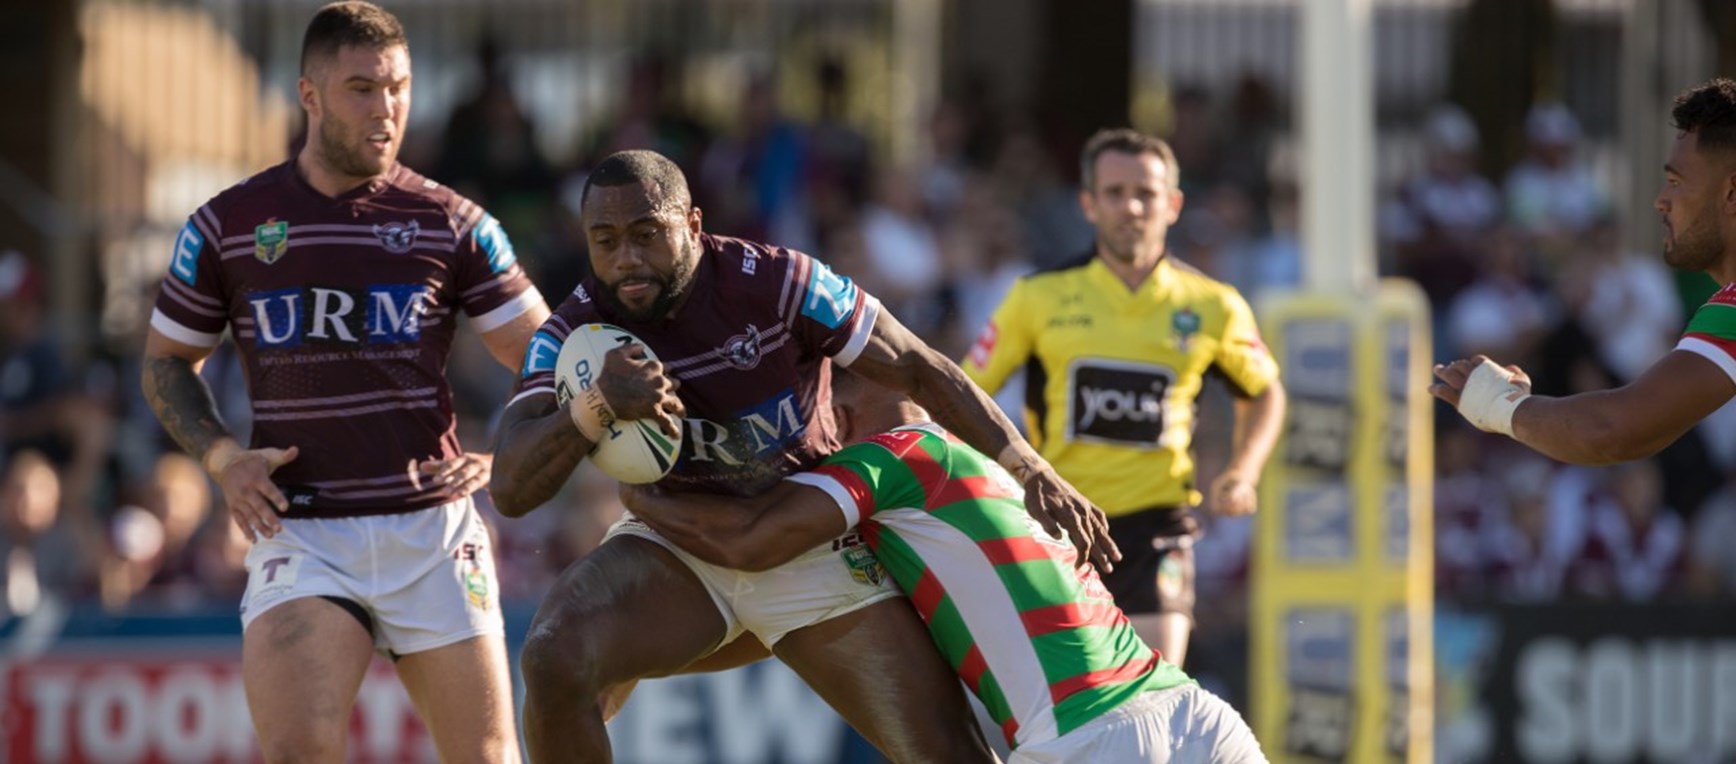 Gallery: Manly v Souths